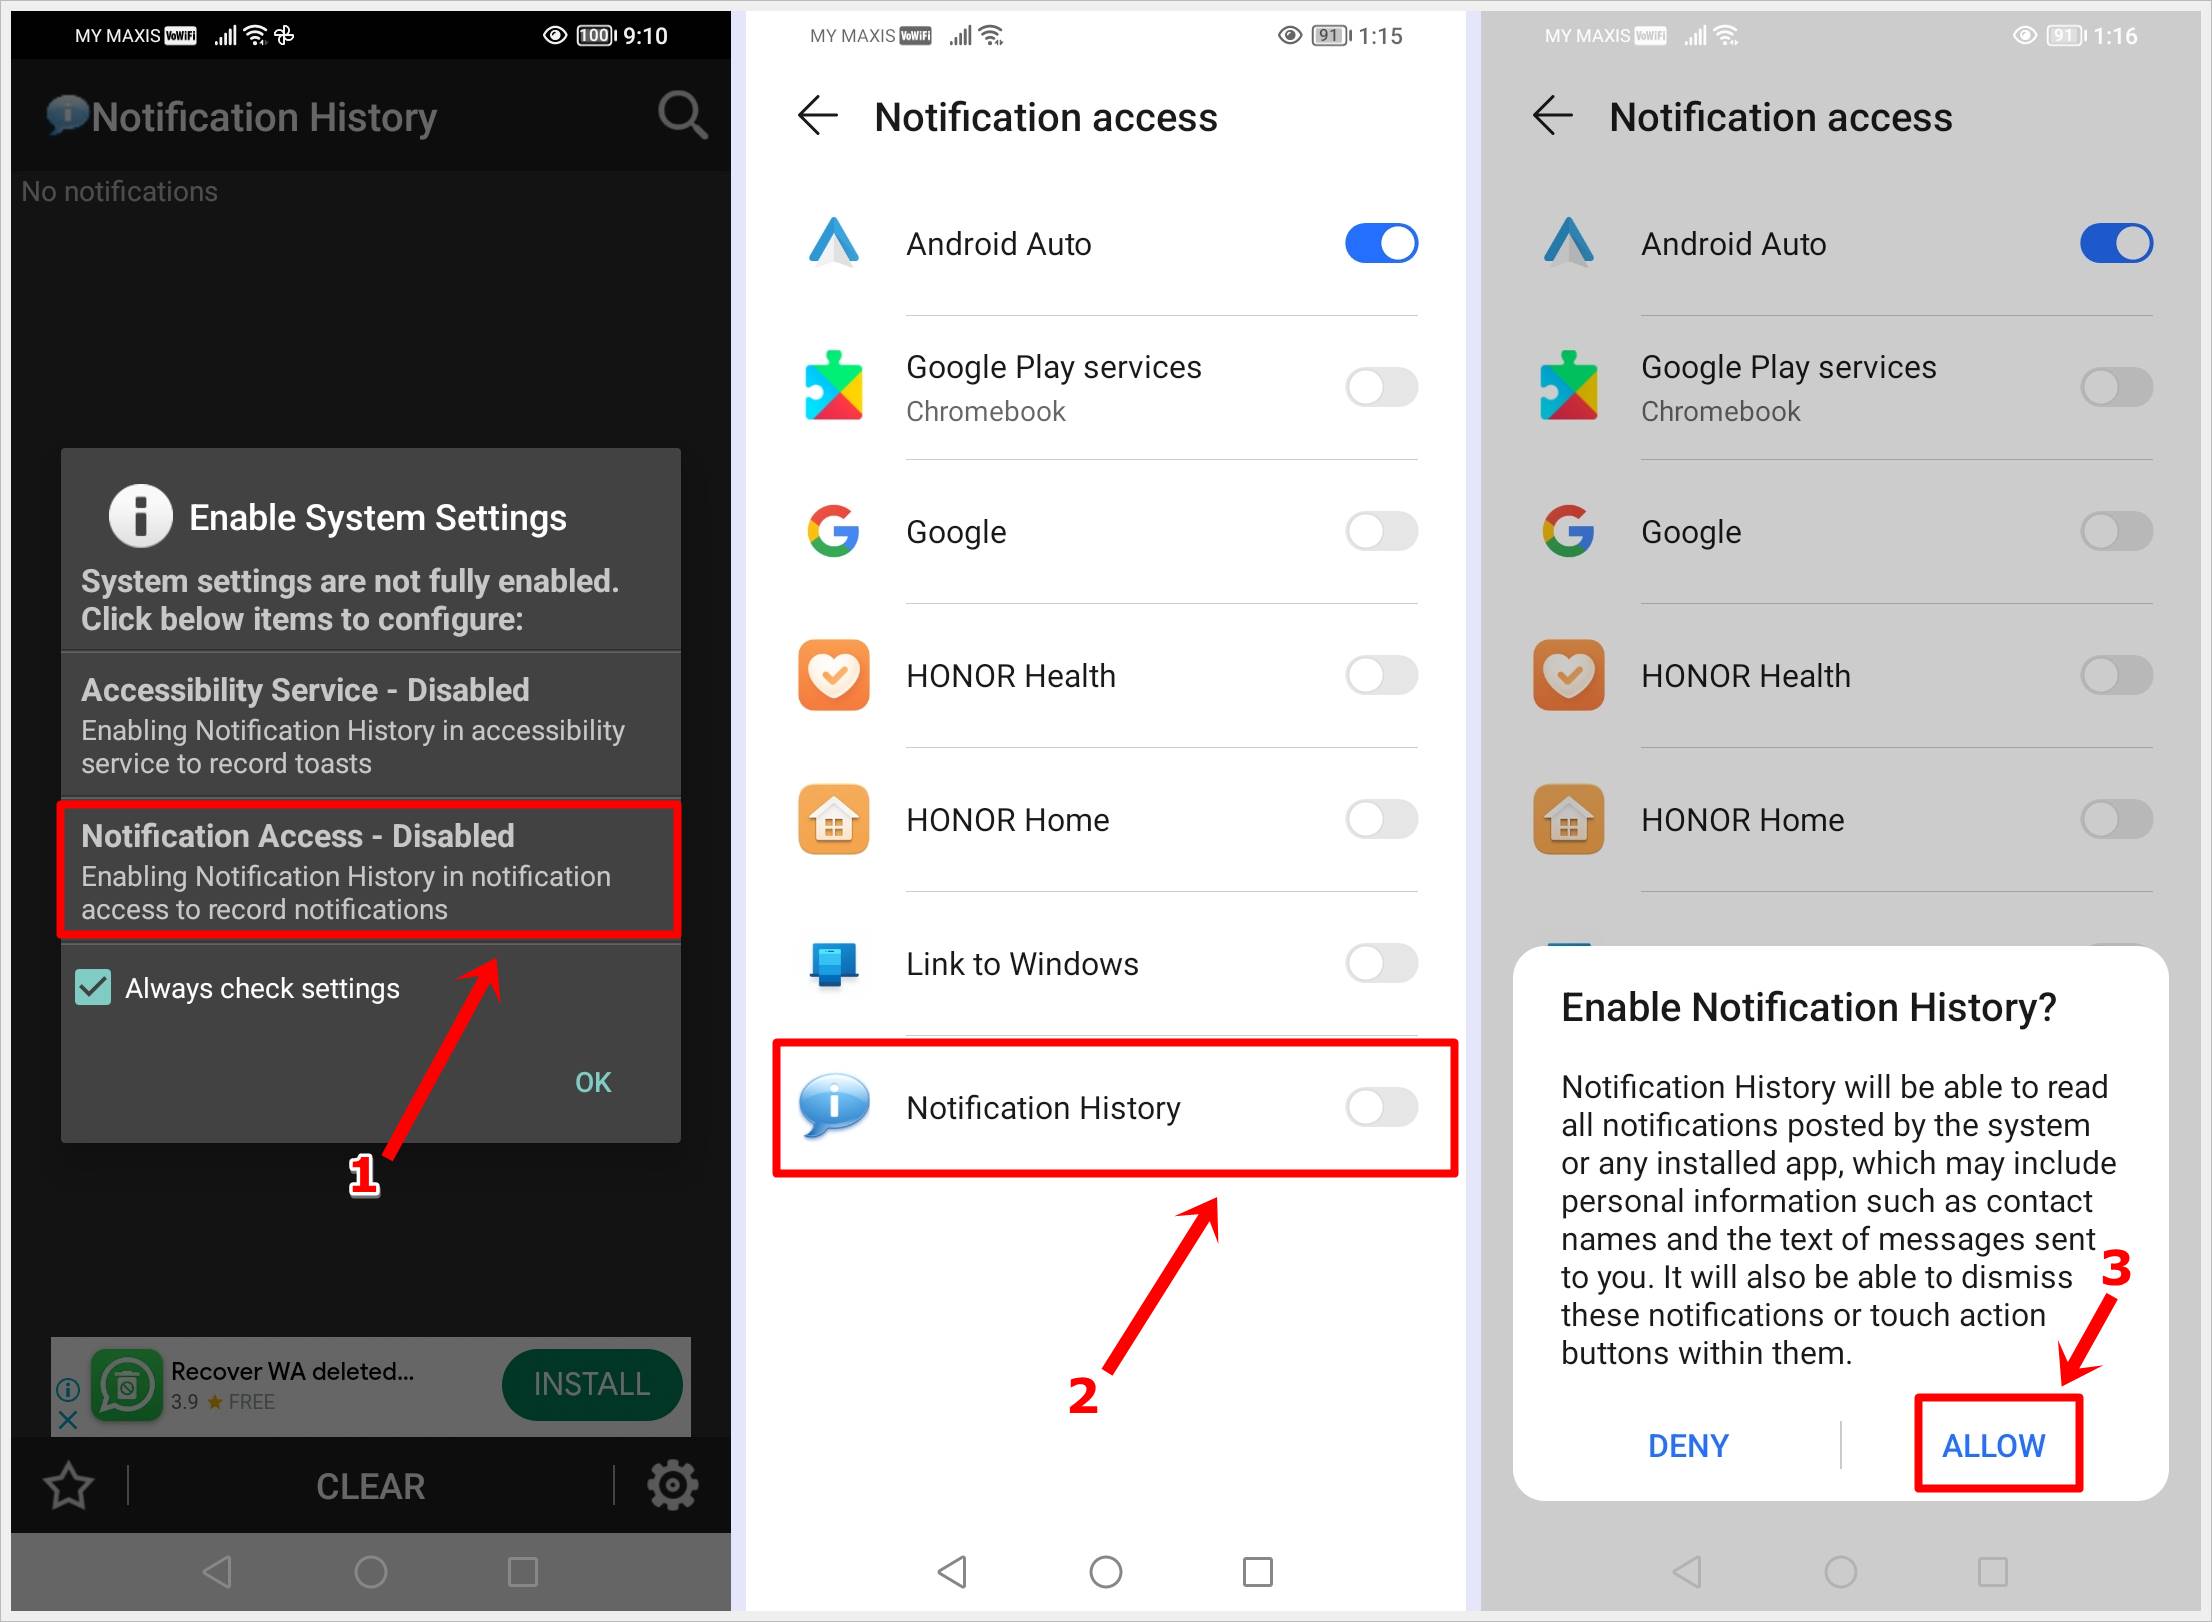 This image shows three screenshots of the step-by-step guide to enable 'Notification History' in 'Notification Access' on an Android phone.